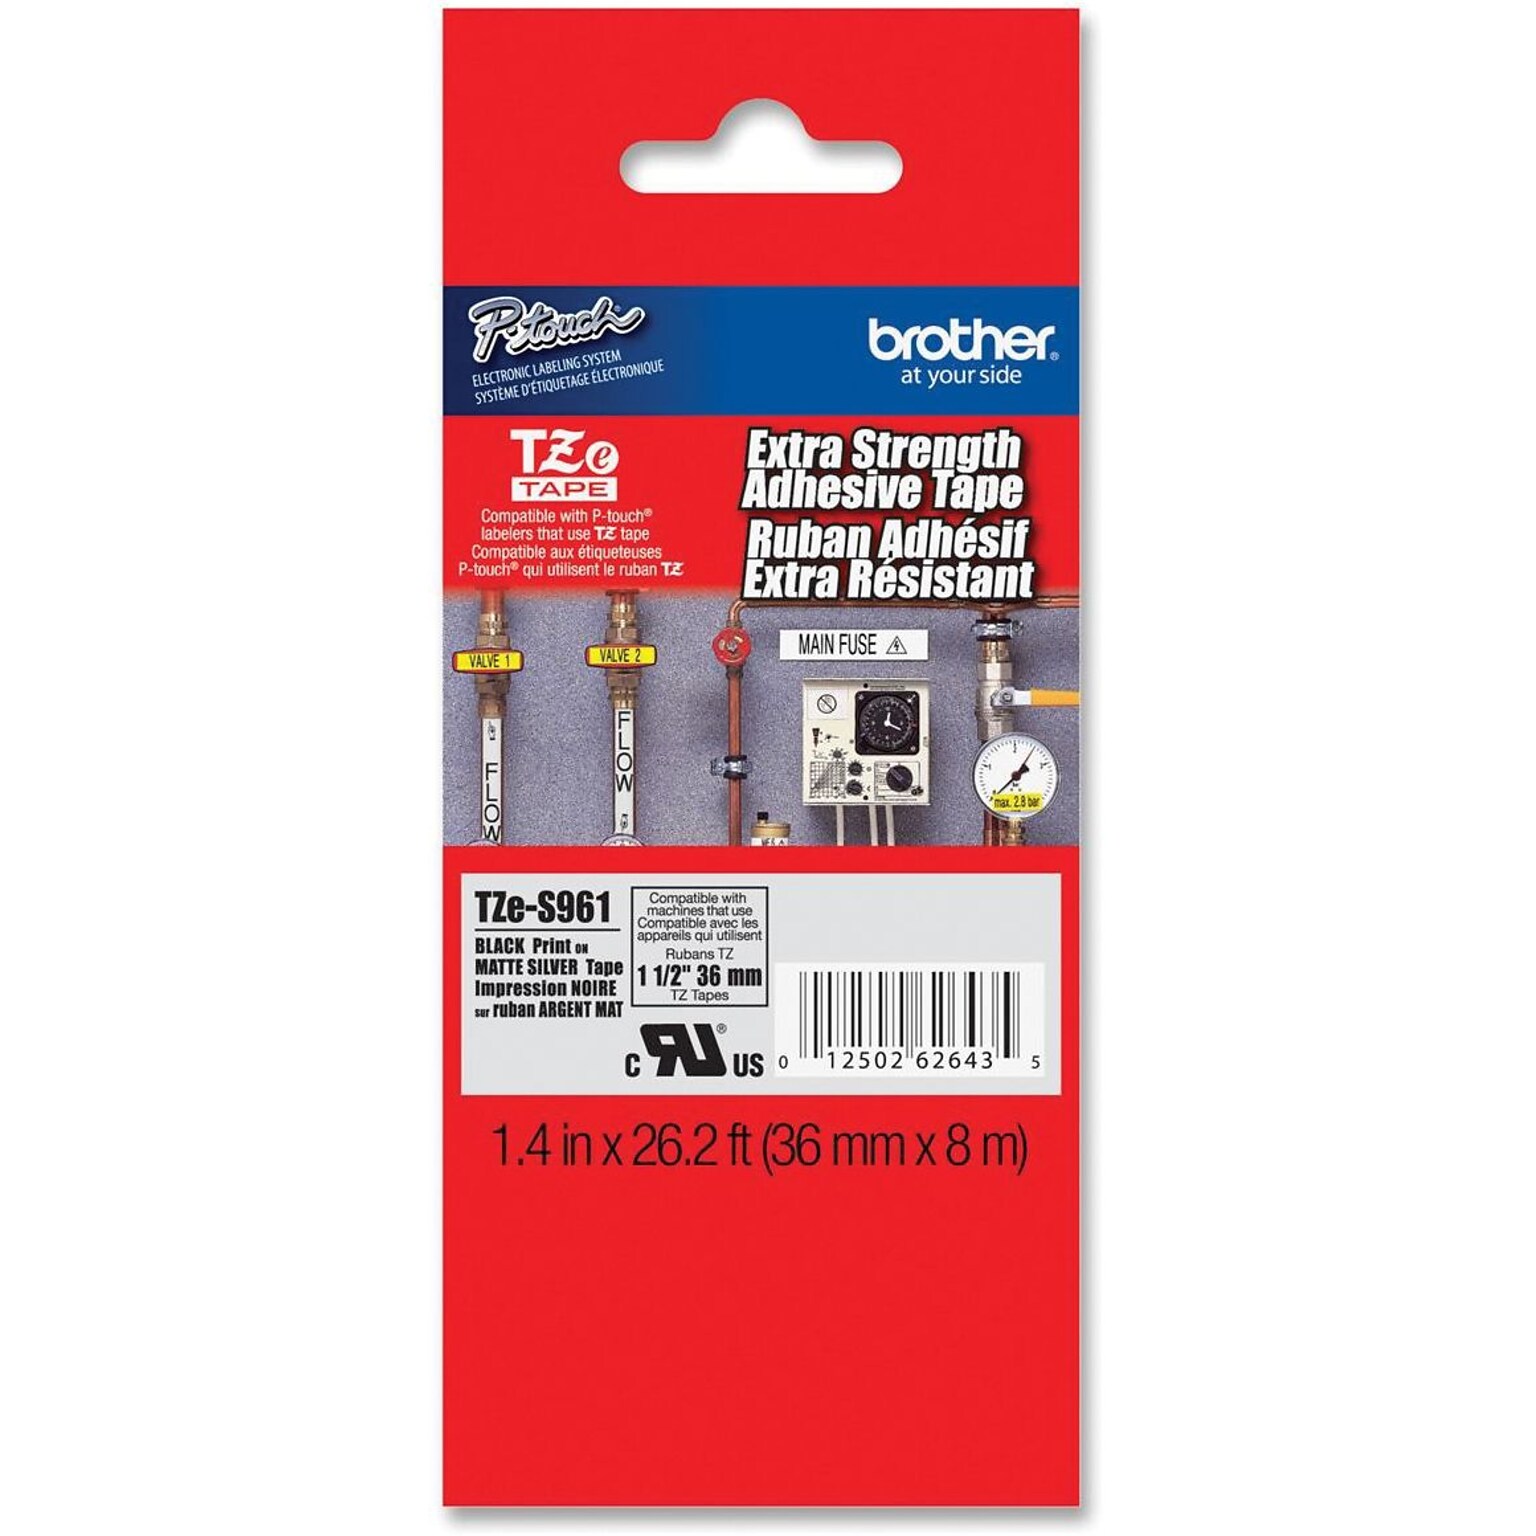 Brother P-touch TZe-S961 Laminated Extra Strength Label Maker Tape, 1-1/2 x 26-2/10, Black on Matte Silver (TZe-S961)